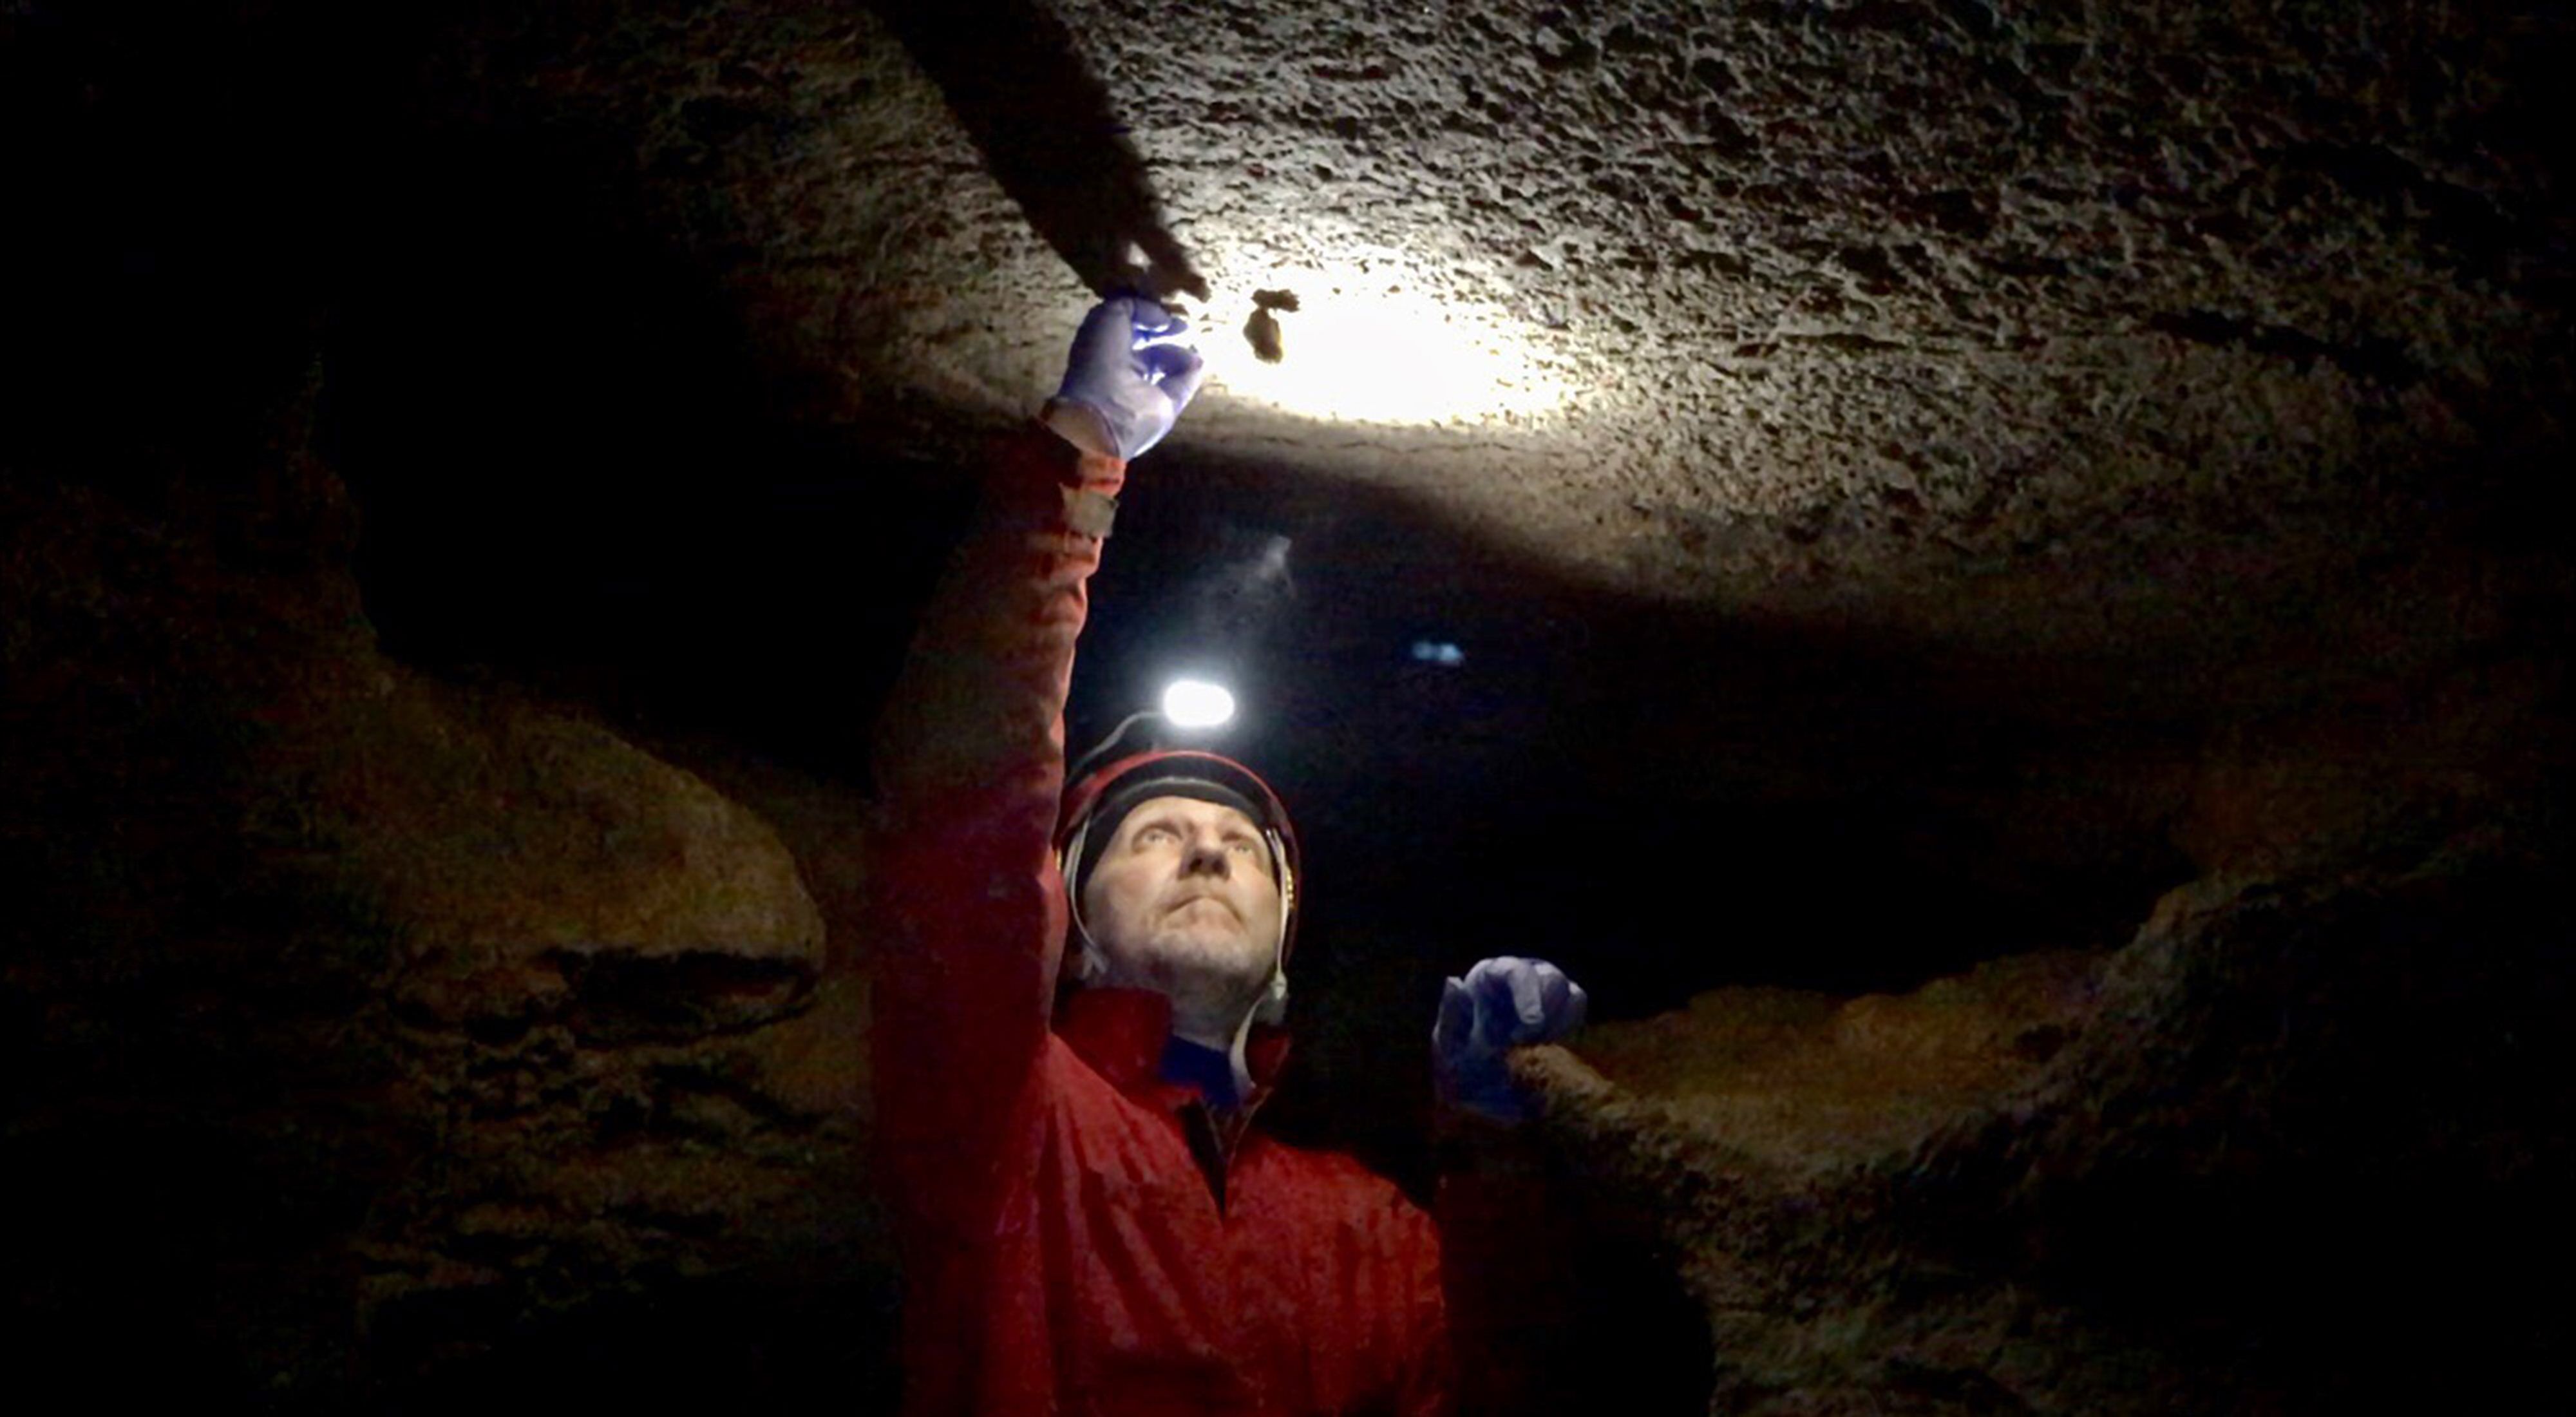 A man wearing orange overalls and a hard hat with a lamp reaches up overhead to gently swab the small brown bat suspended from the low rocky ceiling of a cave.